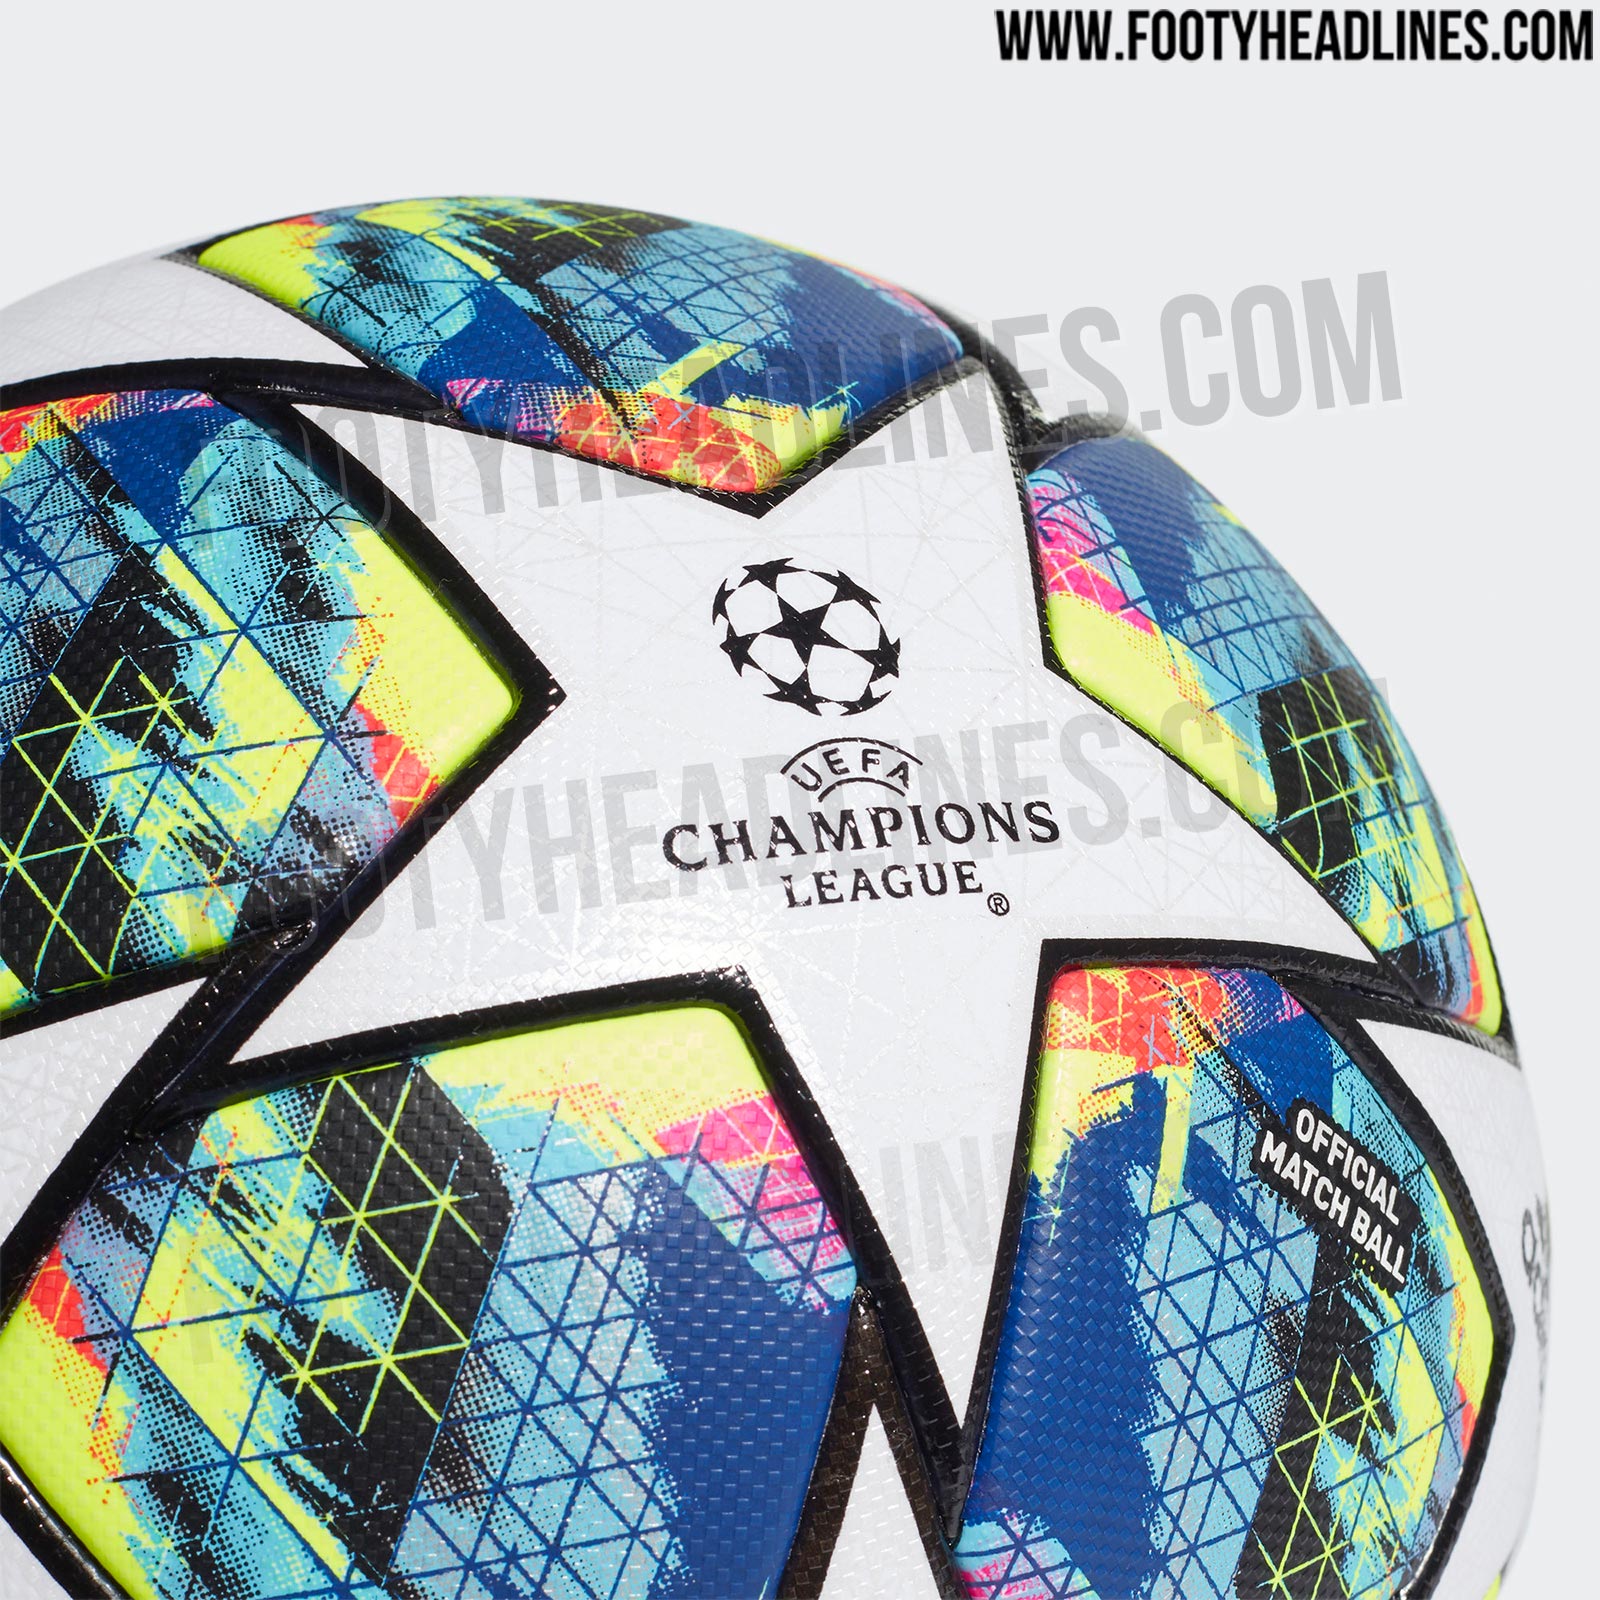 2019 to 2020 champions league ball